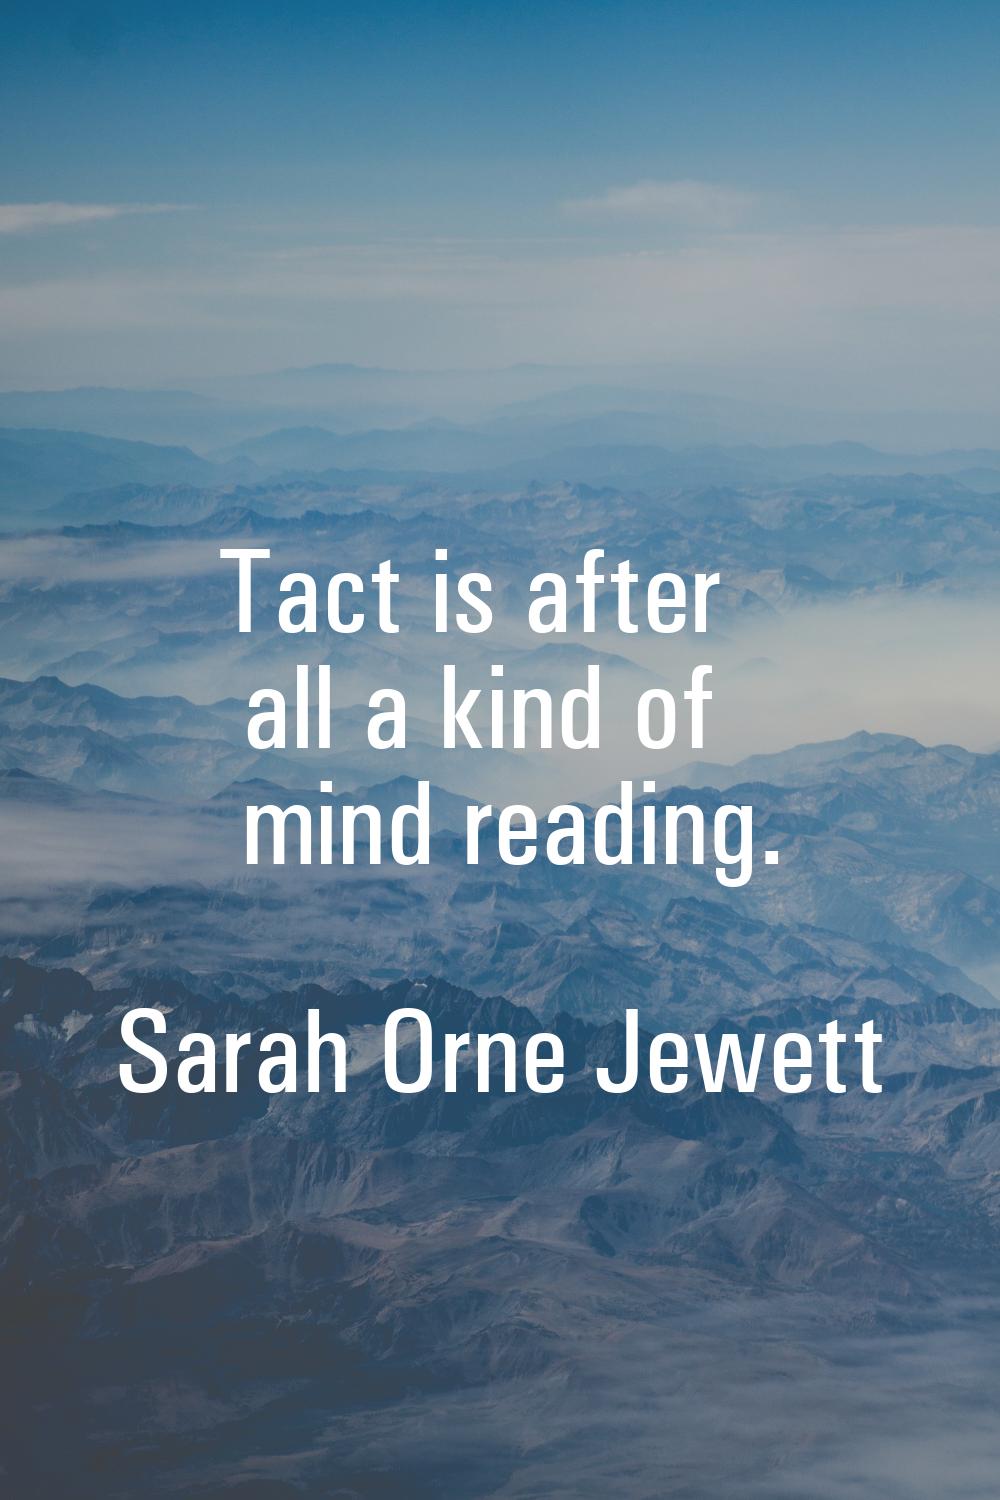 Tact is after all a kind of mind reading.